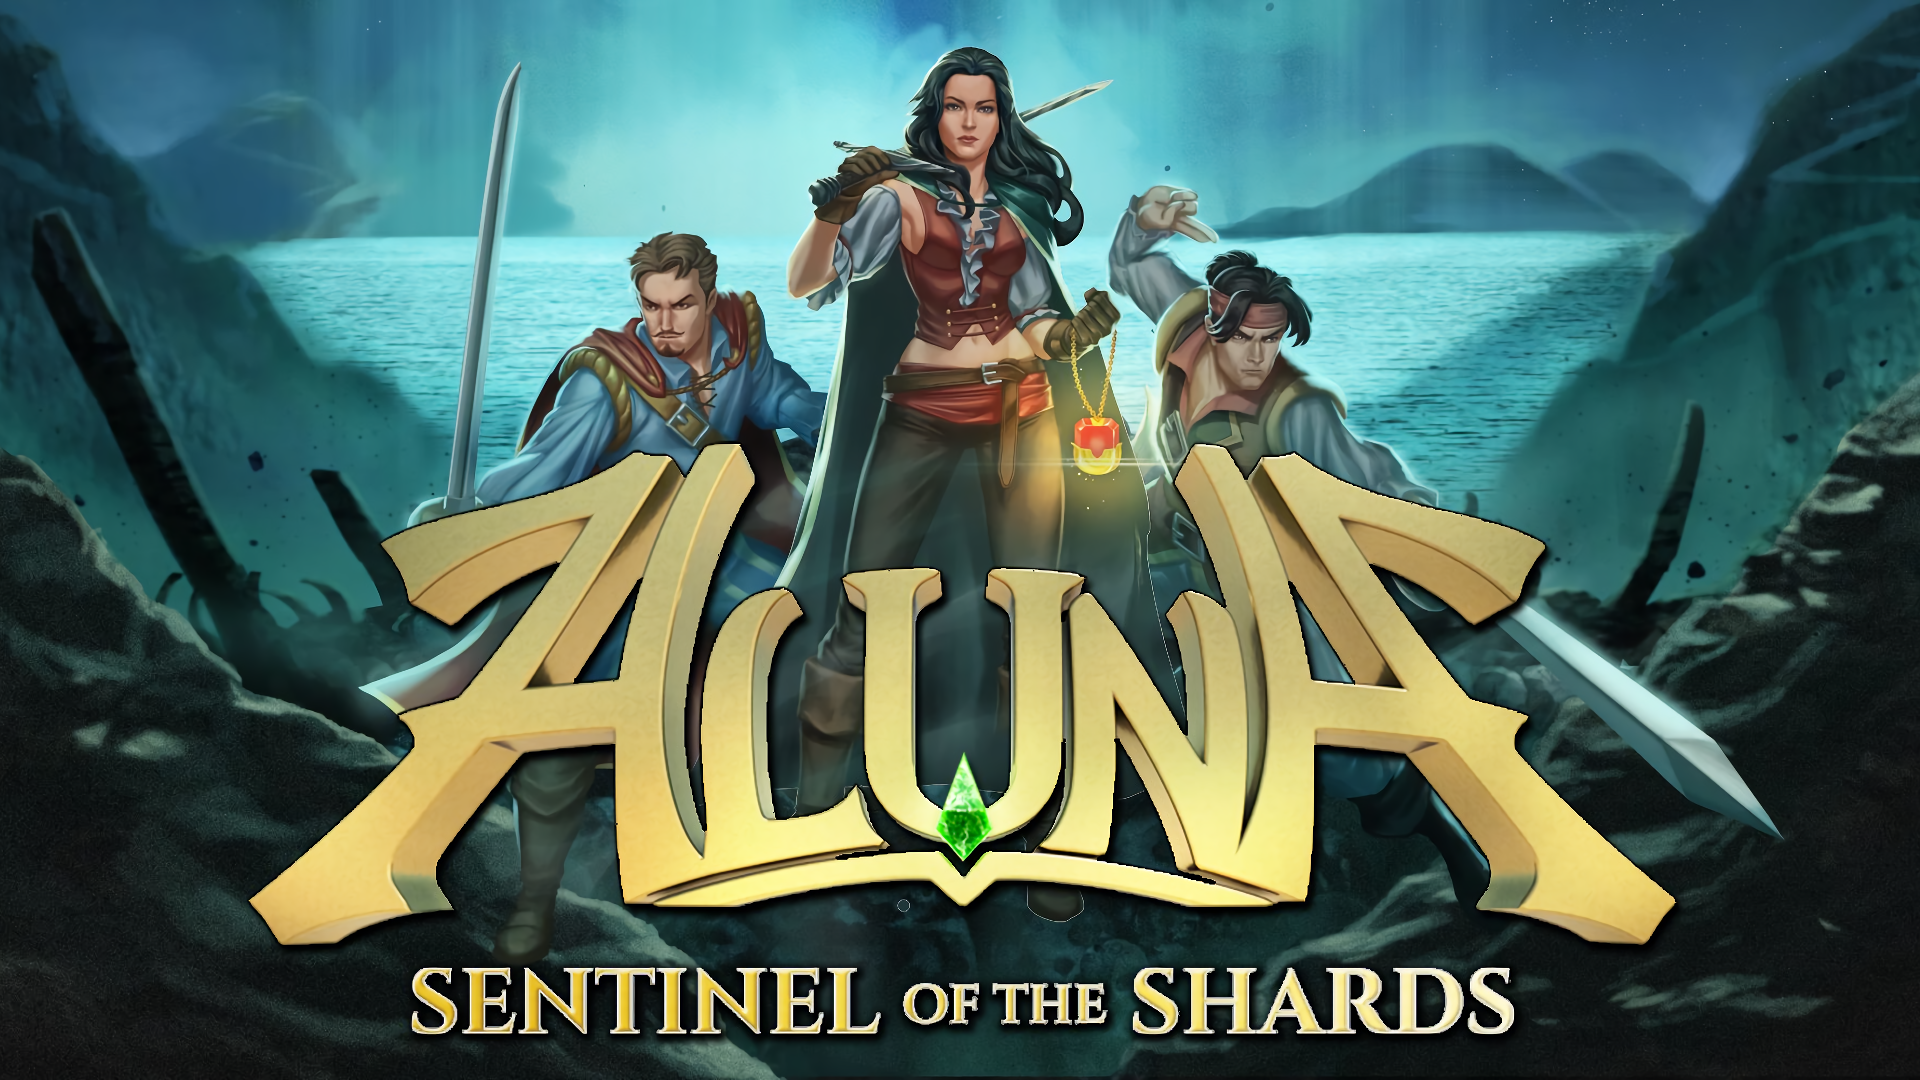 New Aluna Sentinel of the Shards Wallpapers